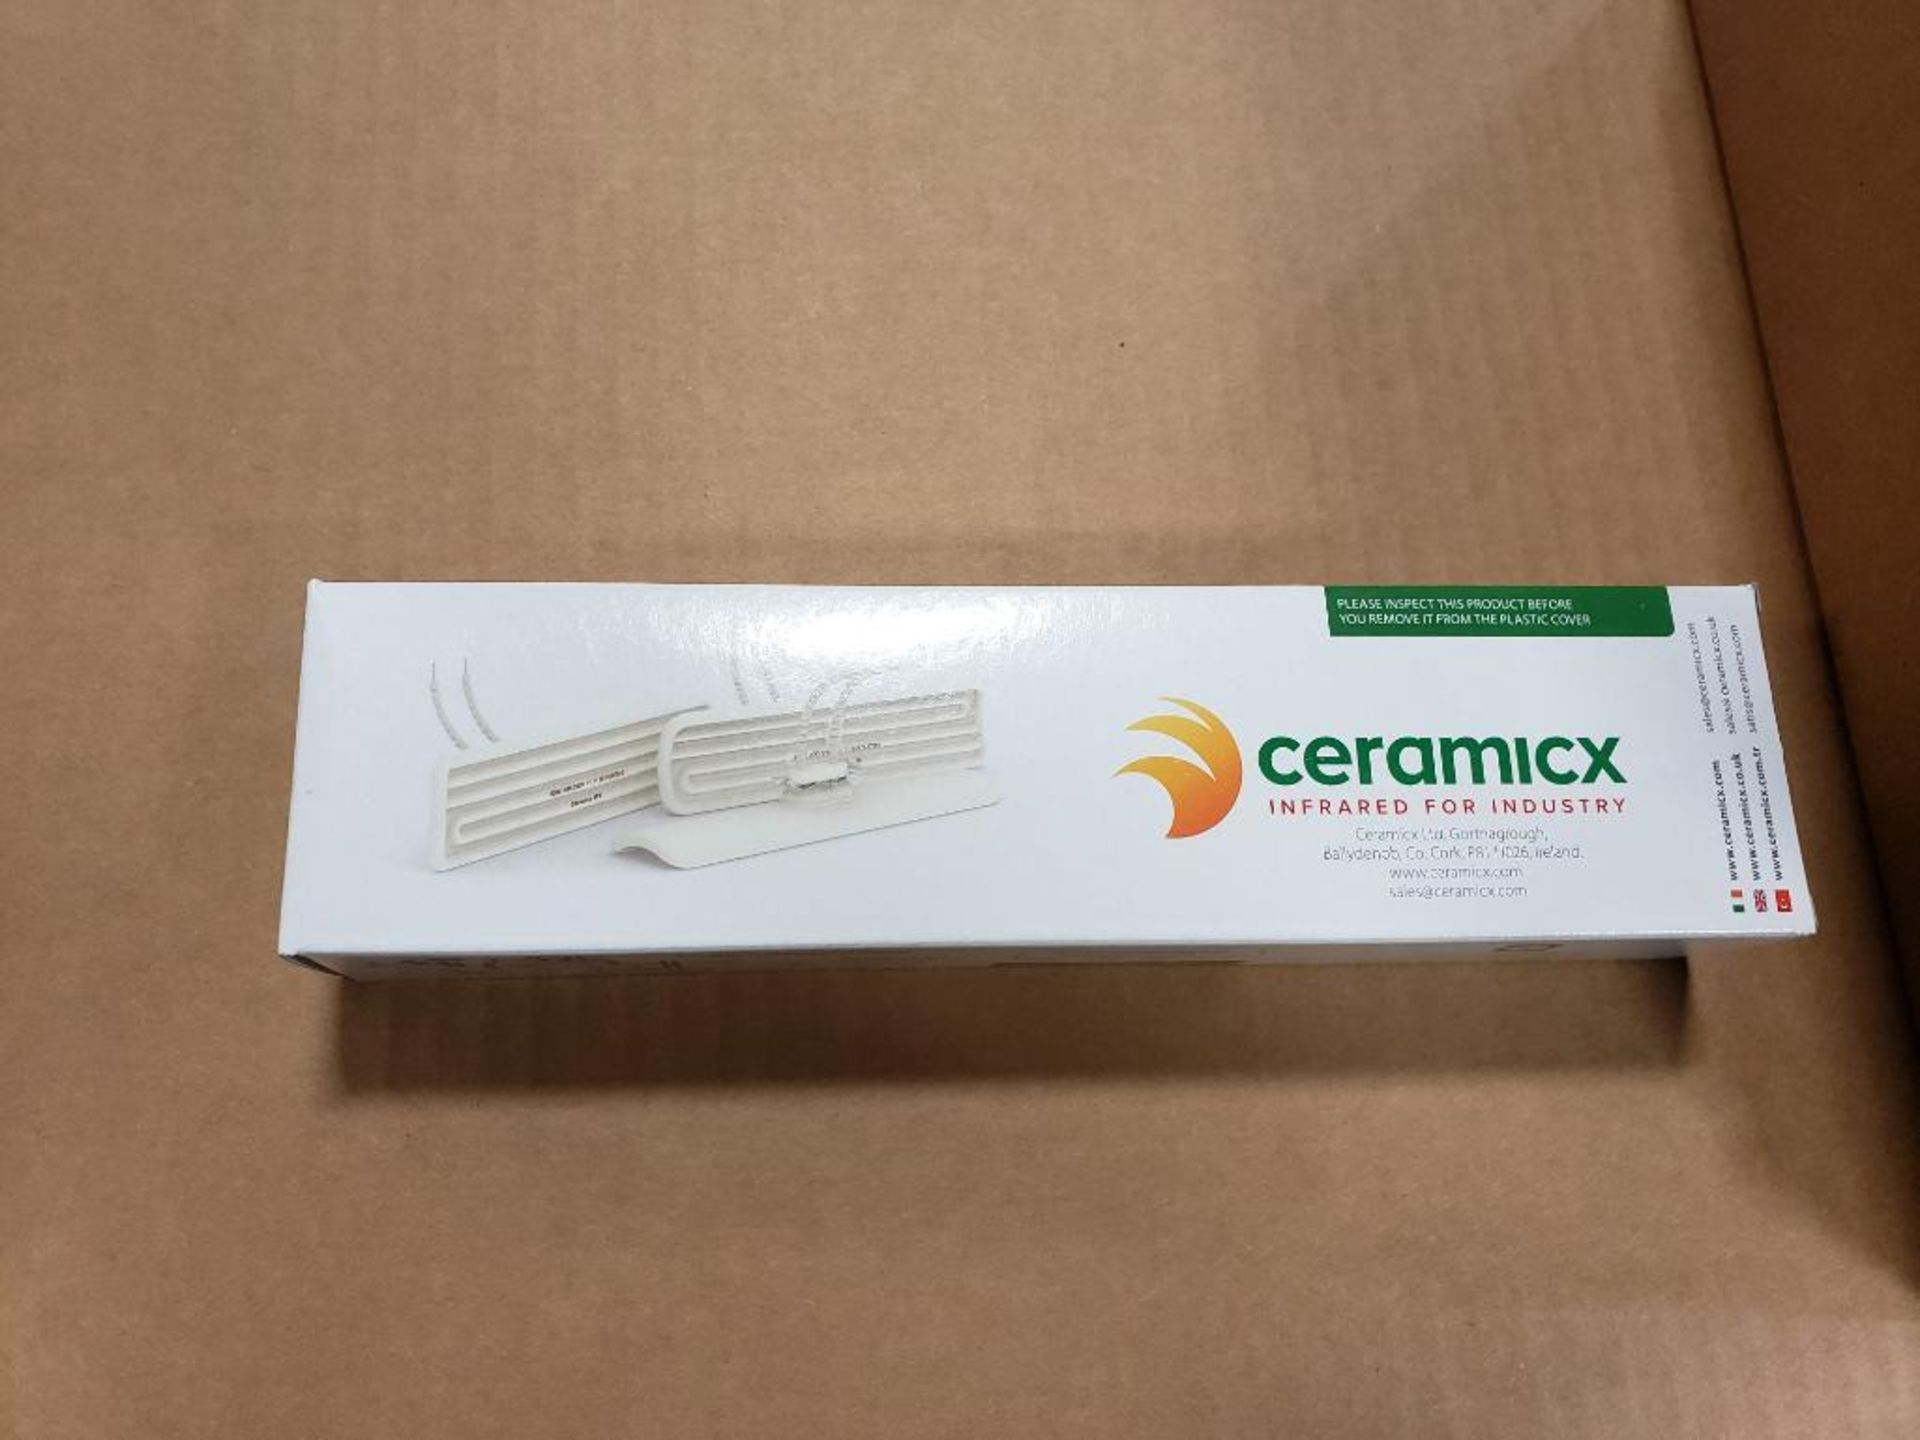 Qty 17 - Ceramicx infrared heating element. New in box. - Image 4 of 7